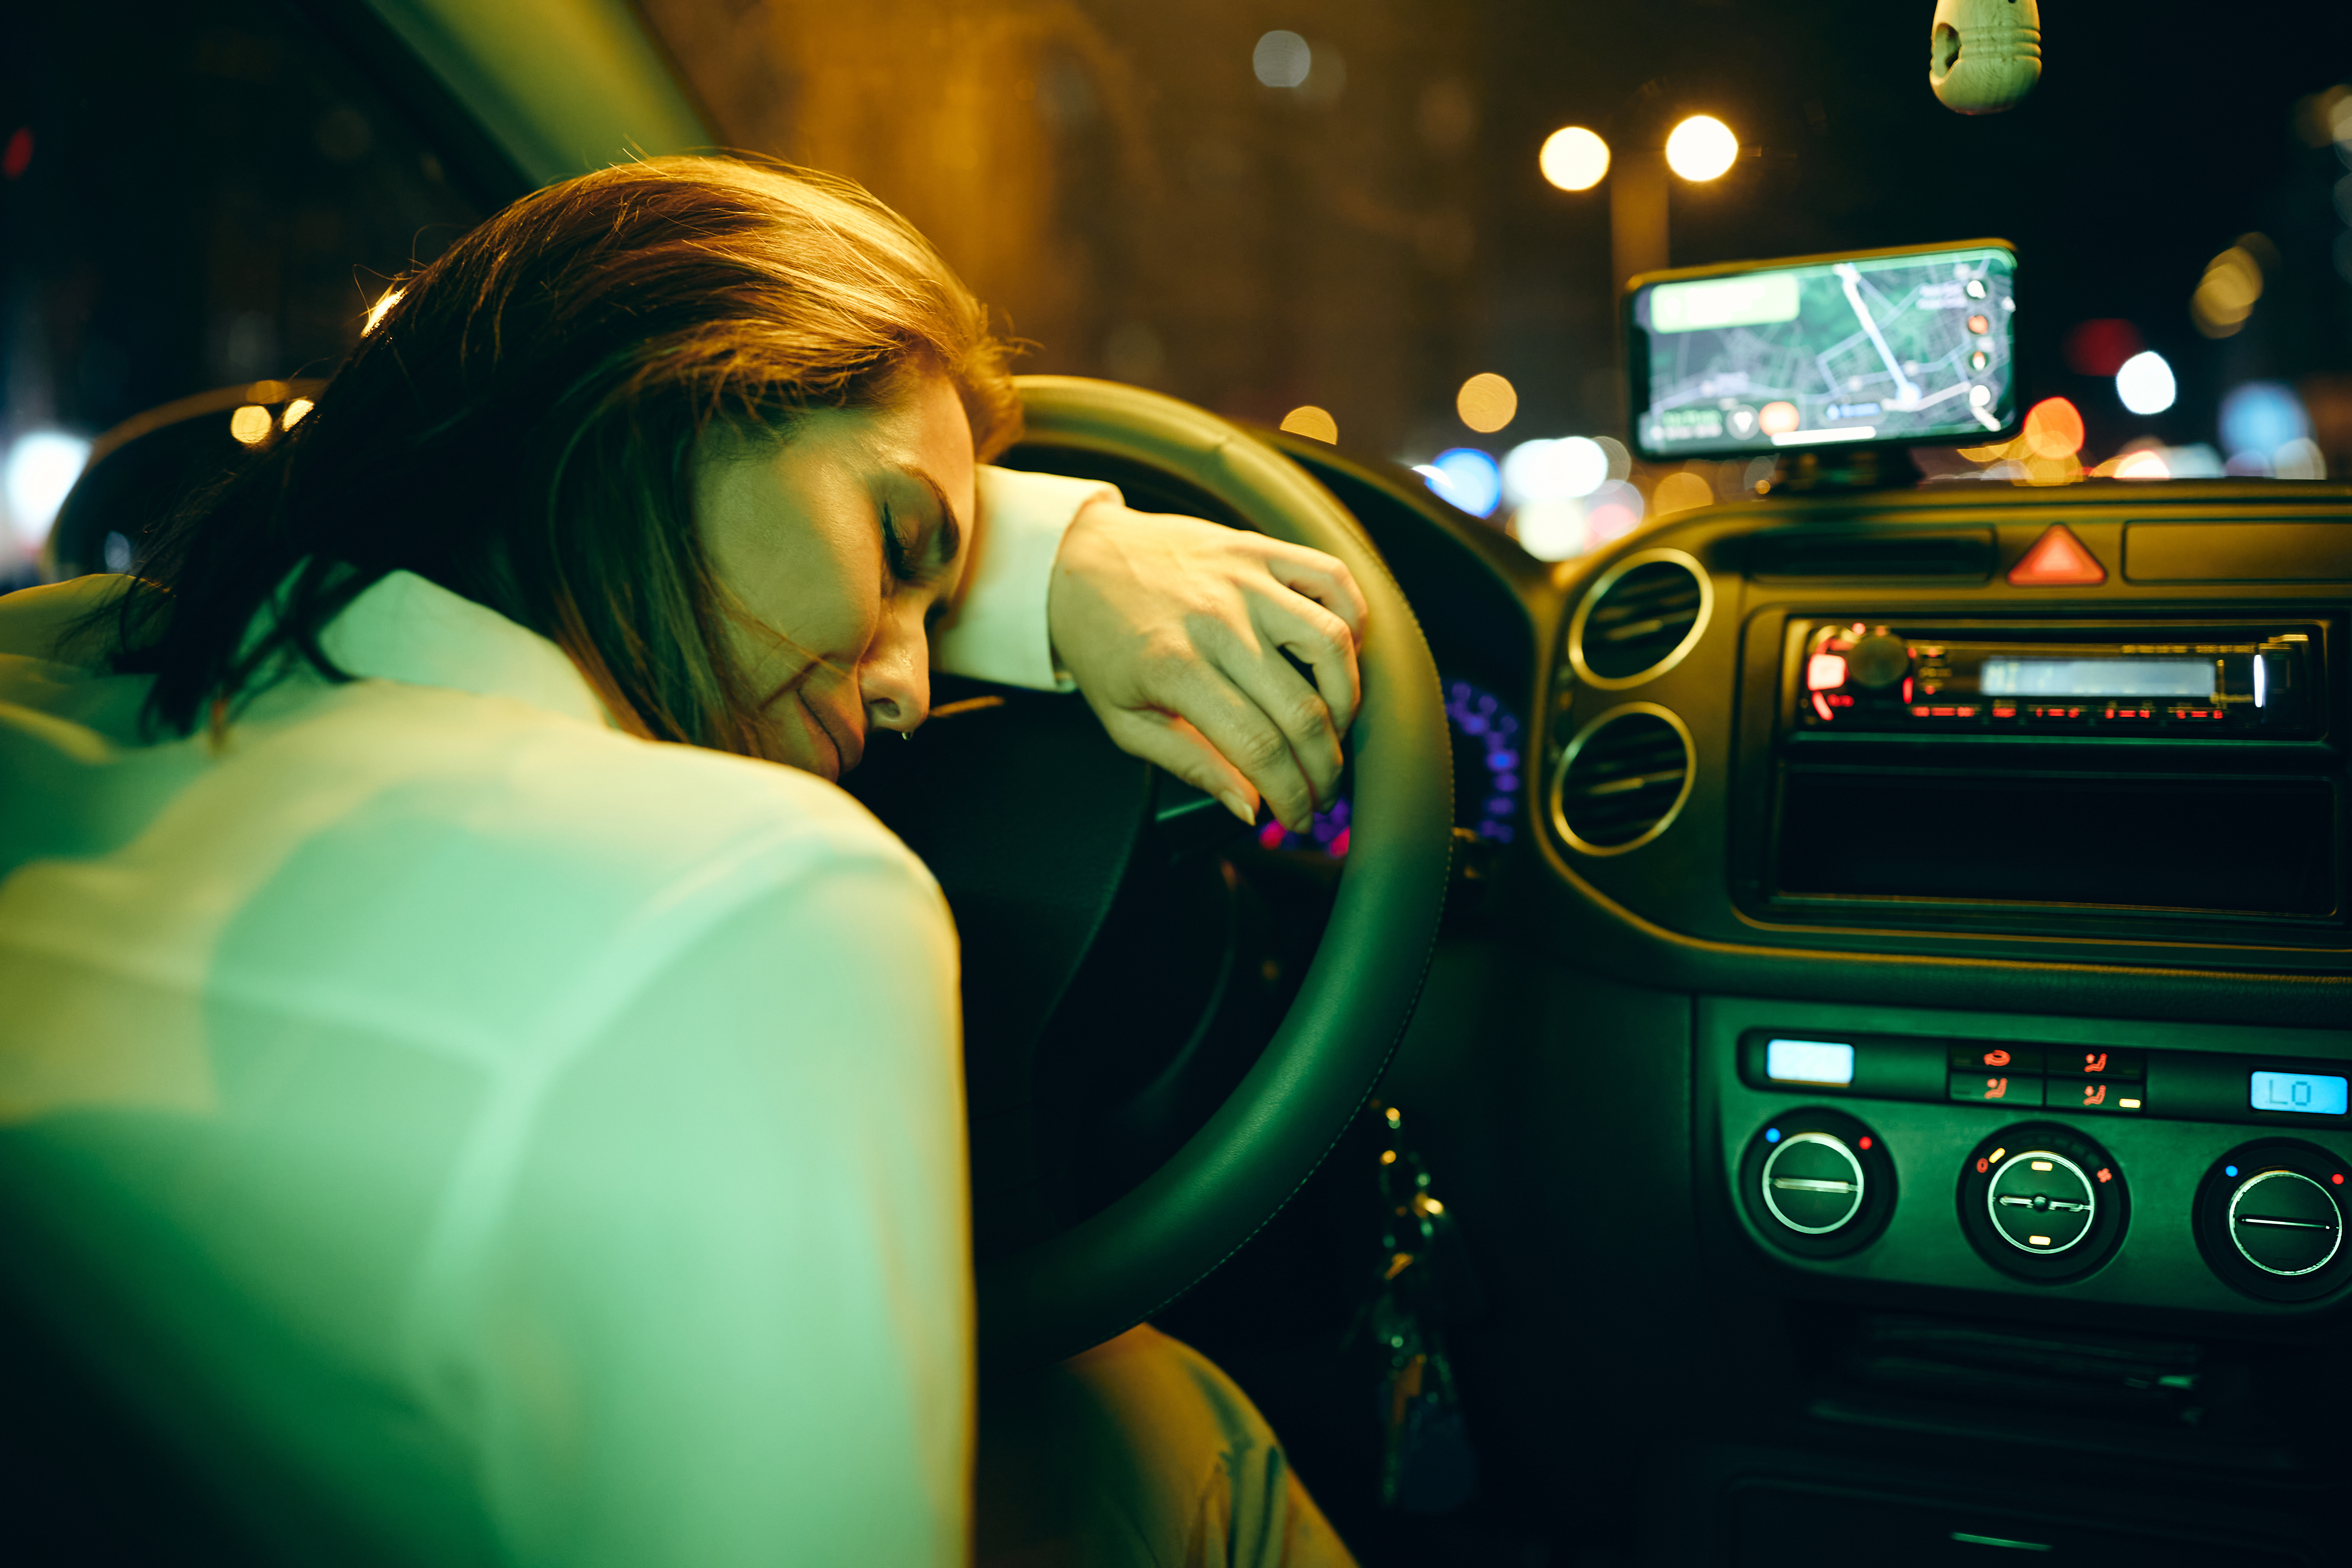 Young depressed woman leaning on steering wheel and crying in car at night. | Source: Shutterstock